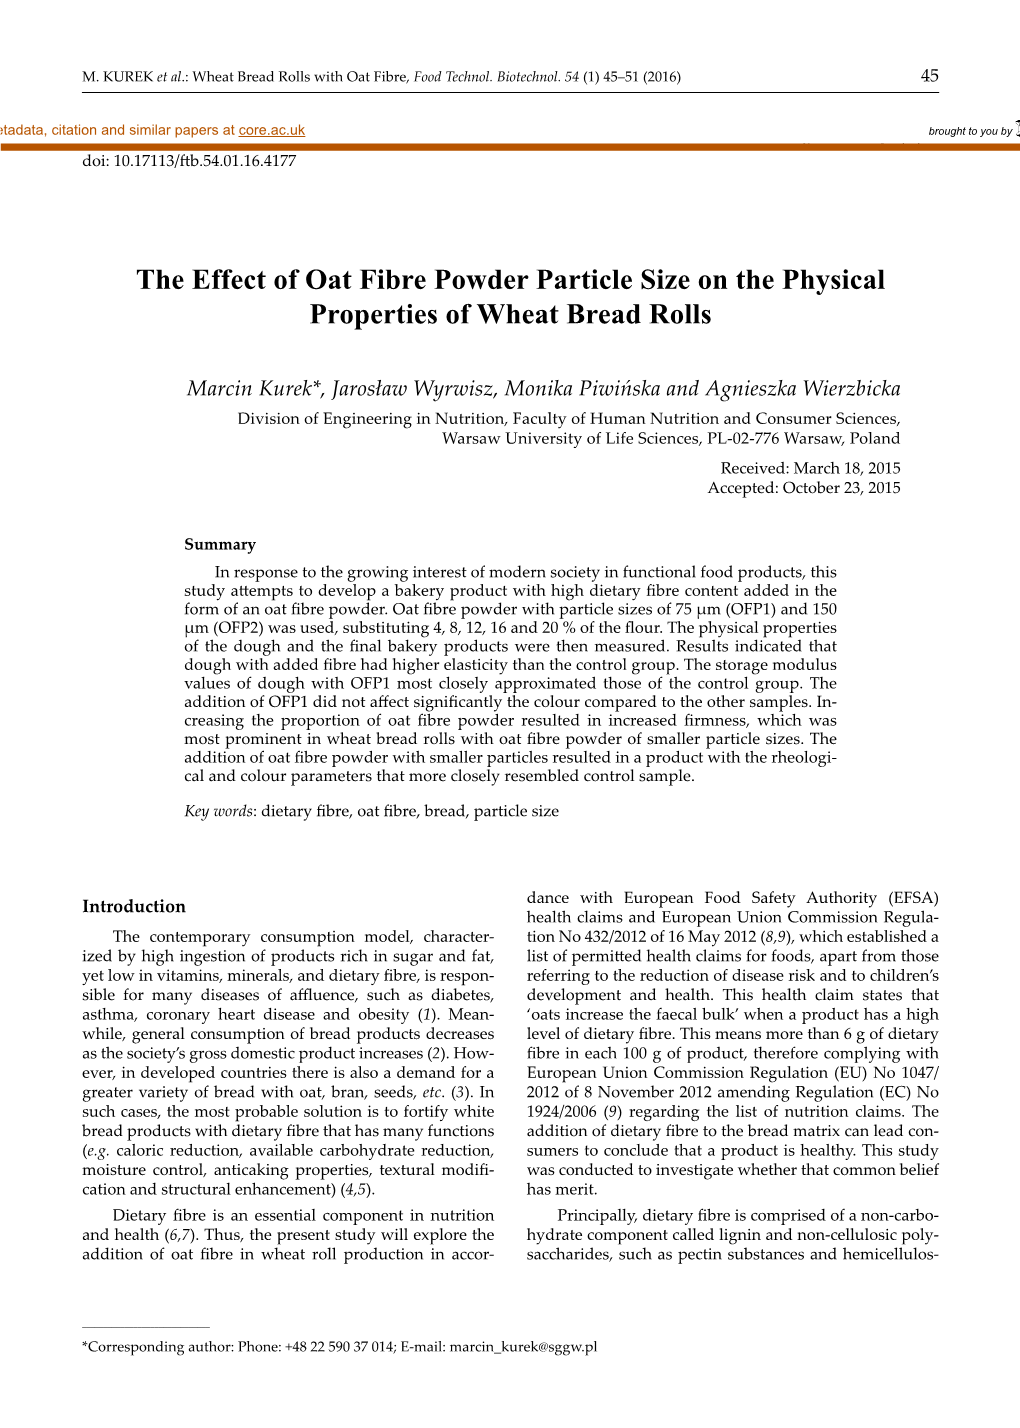 The Effect of Oat Fibre Powder Particle Size on the Physical Properties of Wheat Bread Rolls